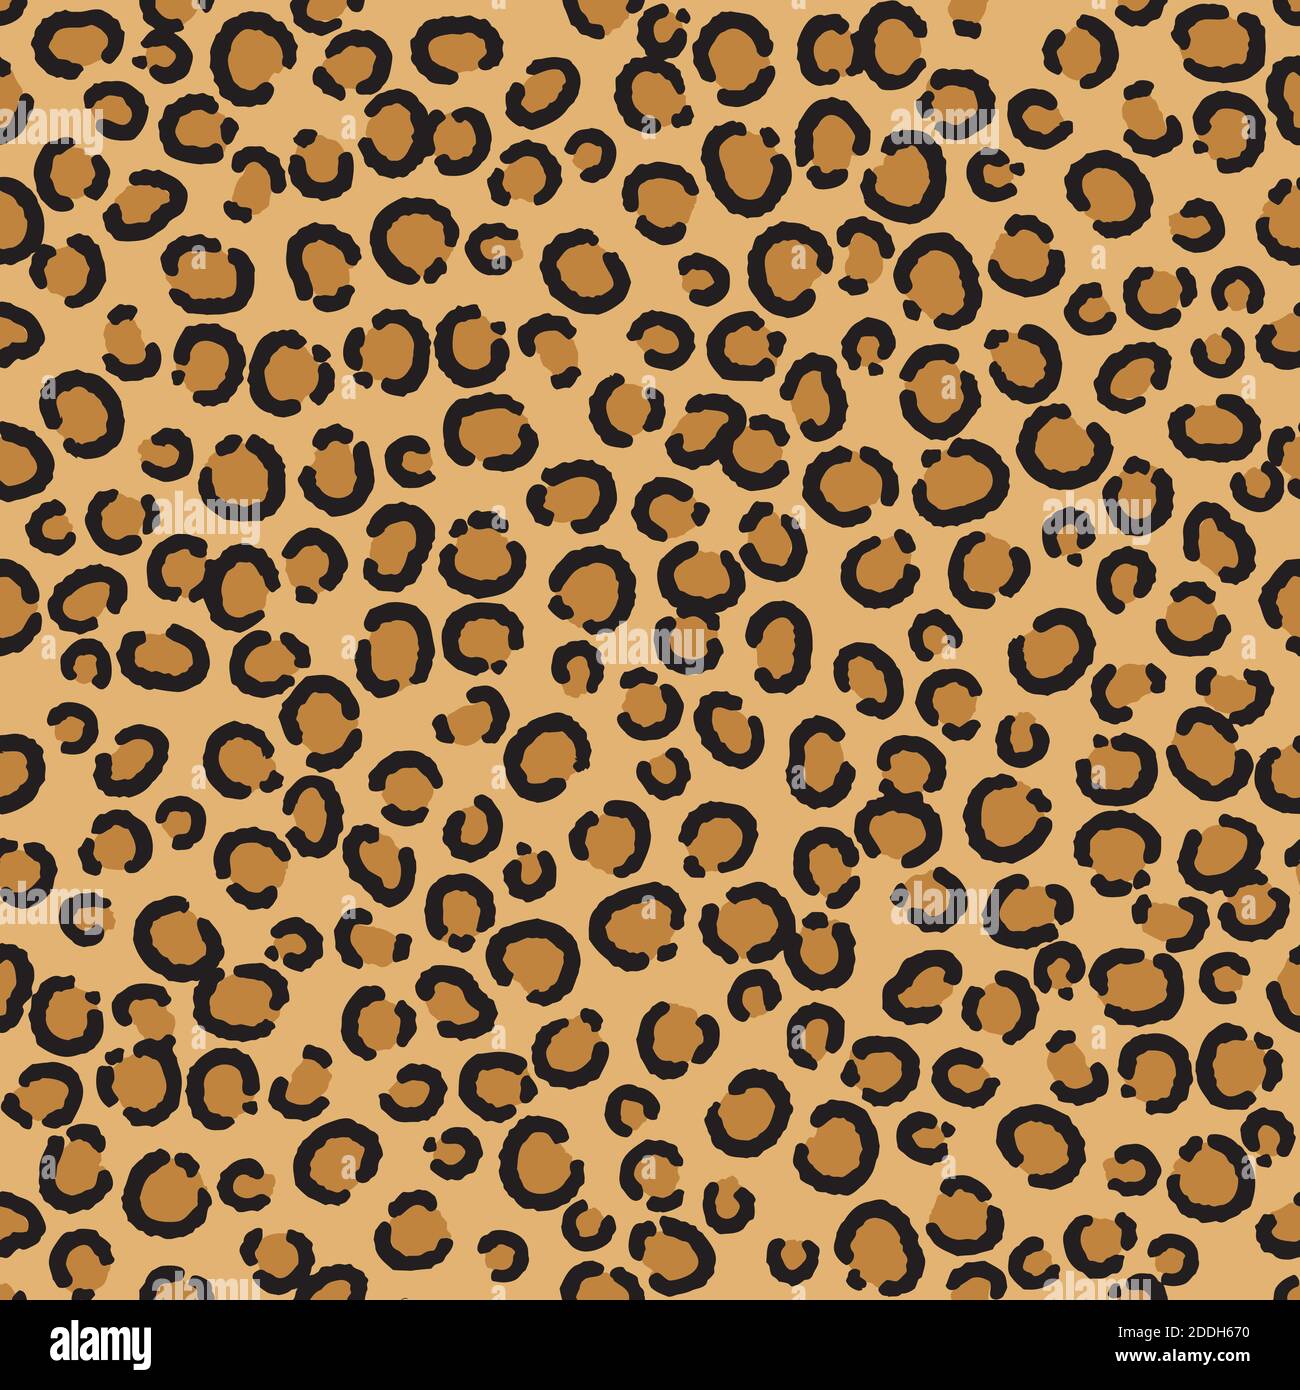 Leopard Spots Animal Skin Seamless Repeating Pattern Background Vector Illustration Stock Vector